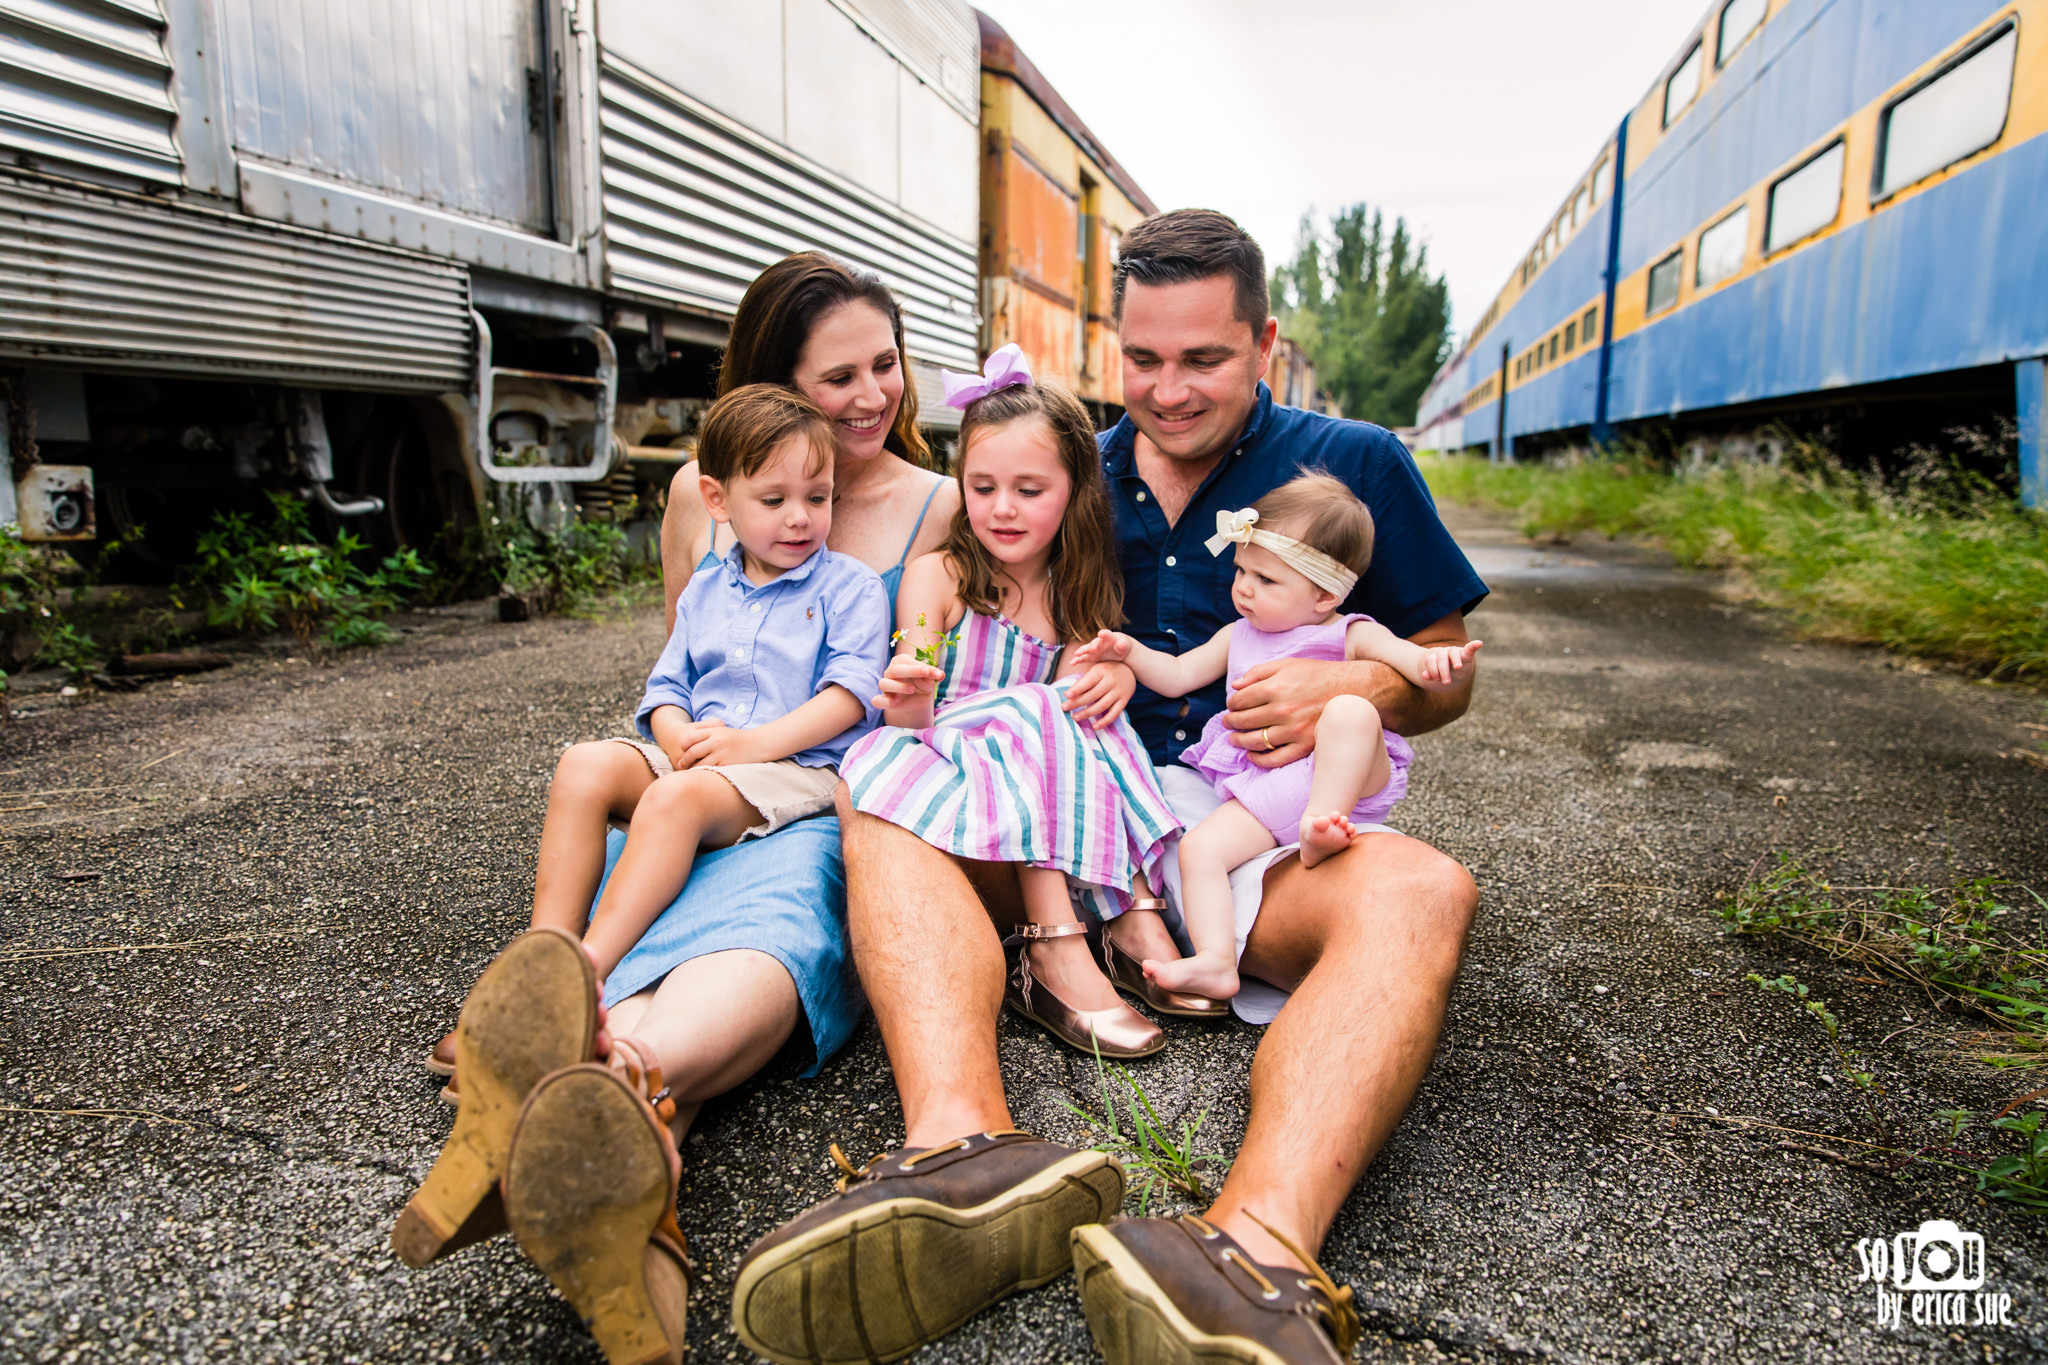 so-you-by-erica-sue-gold-coast-railroad-museum-miami-family-photo-shoot-session-7449.JPG